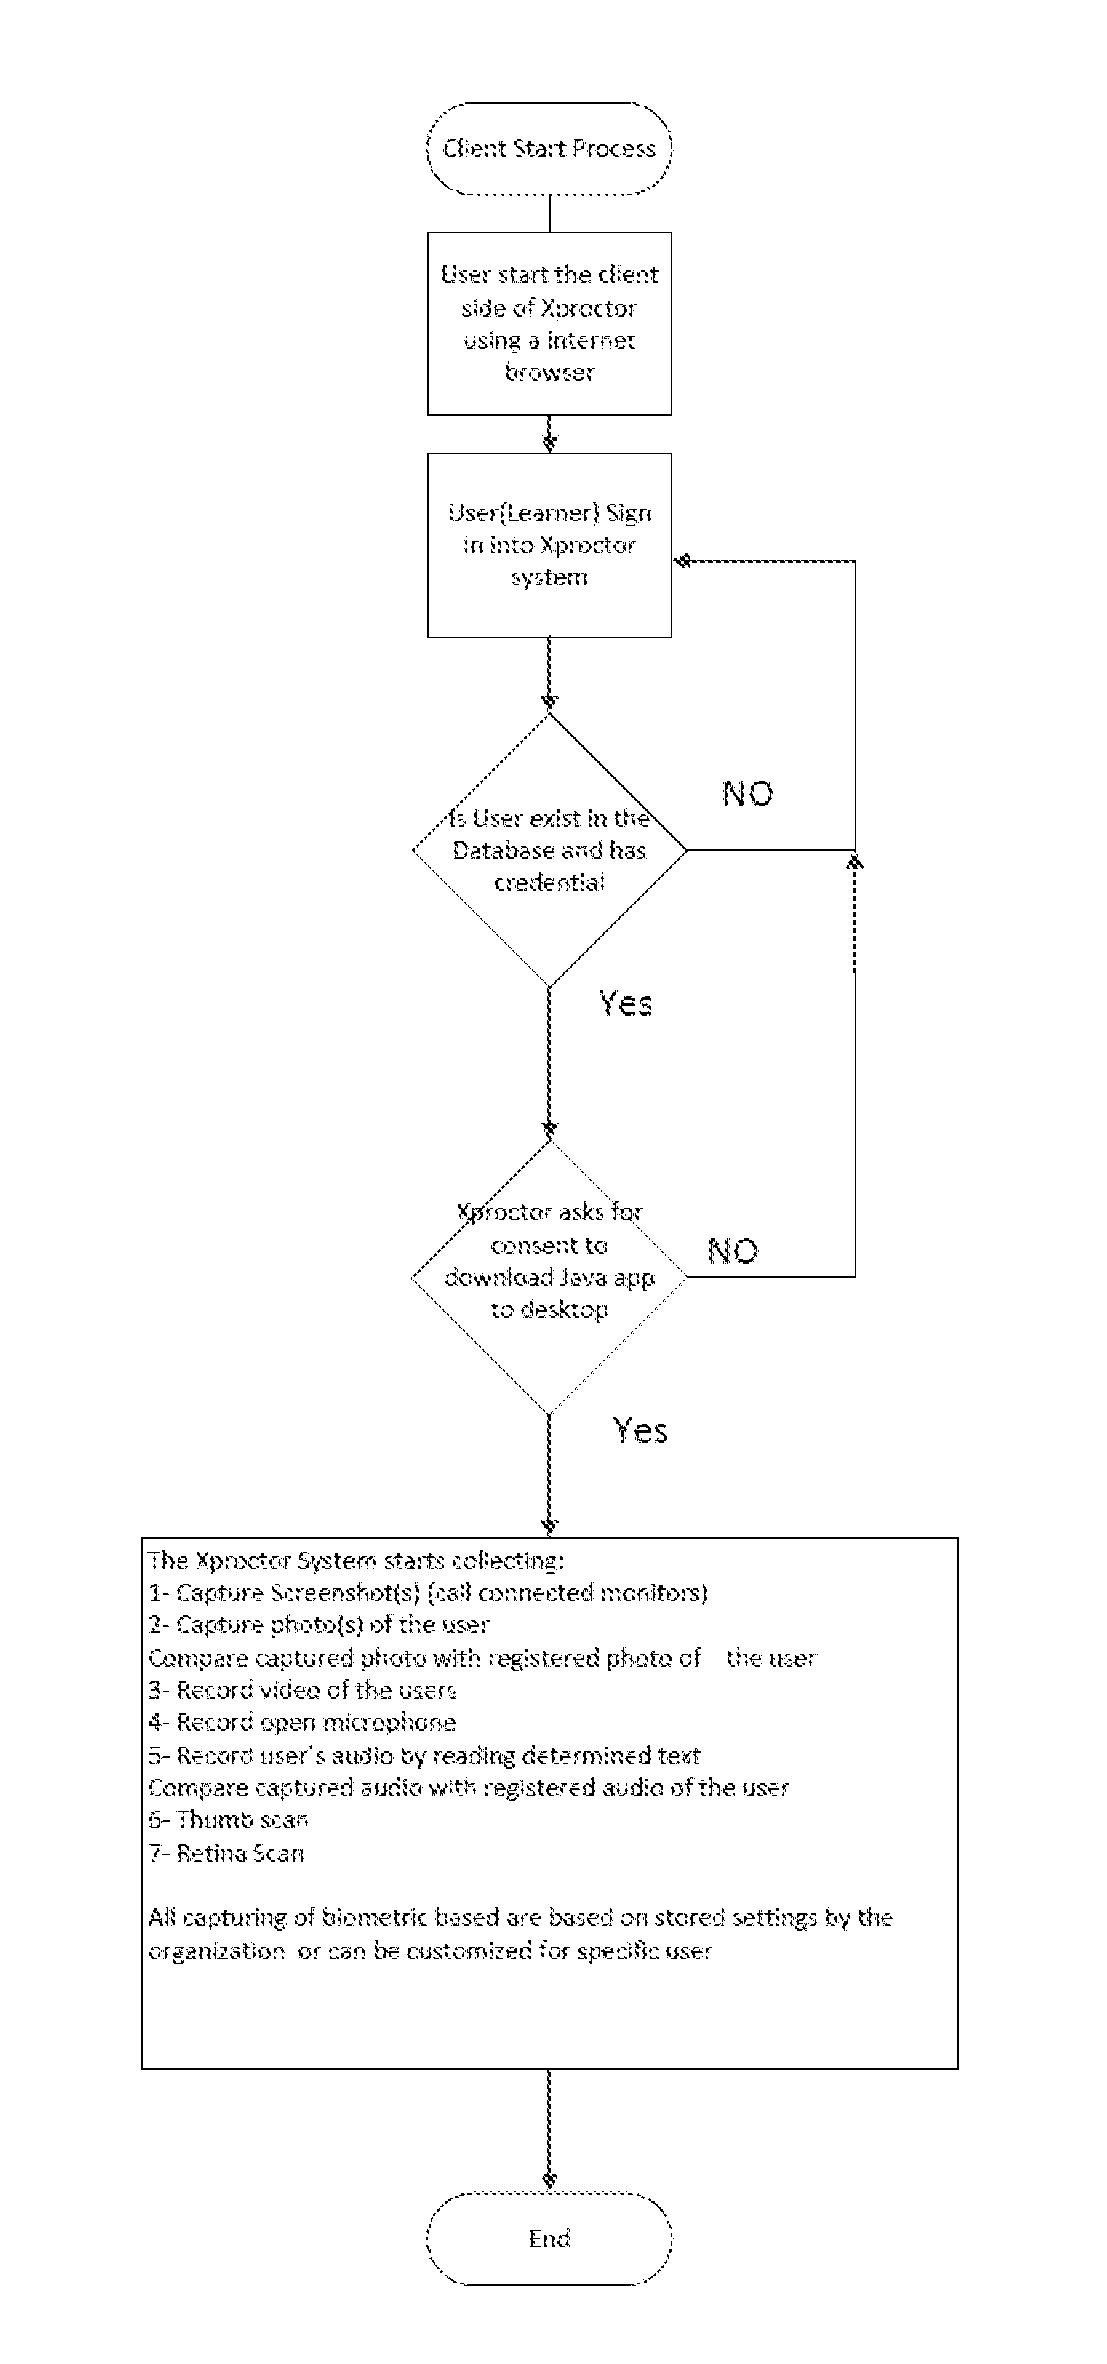 Integrated user authentication and proctoring system for online and distance education courses and methods of use